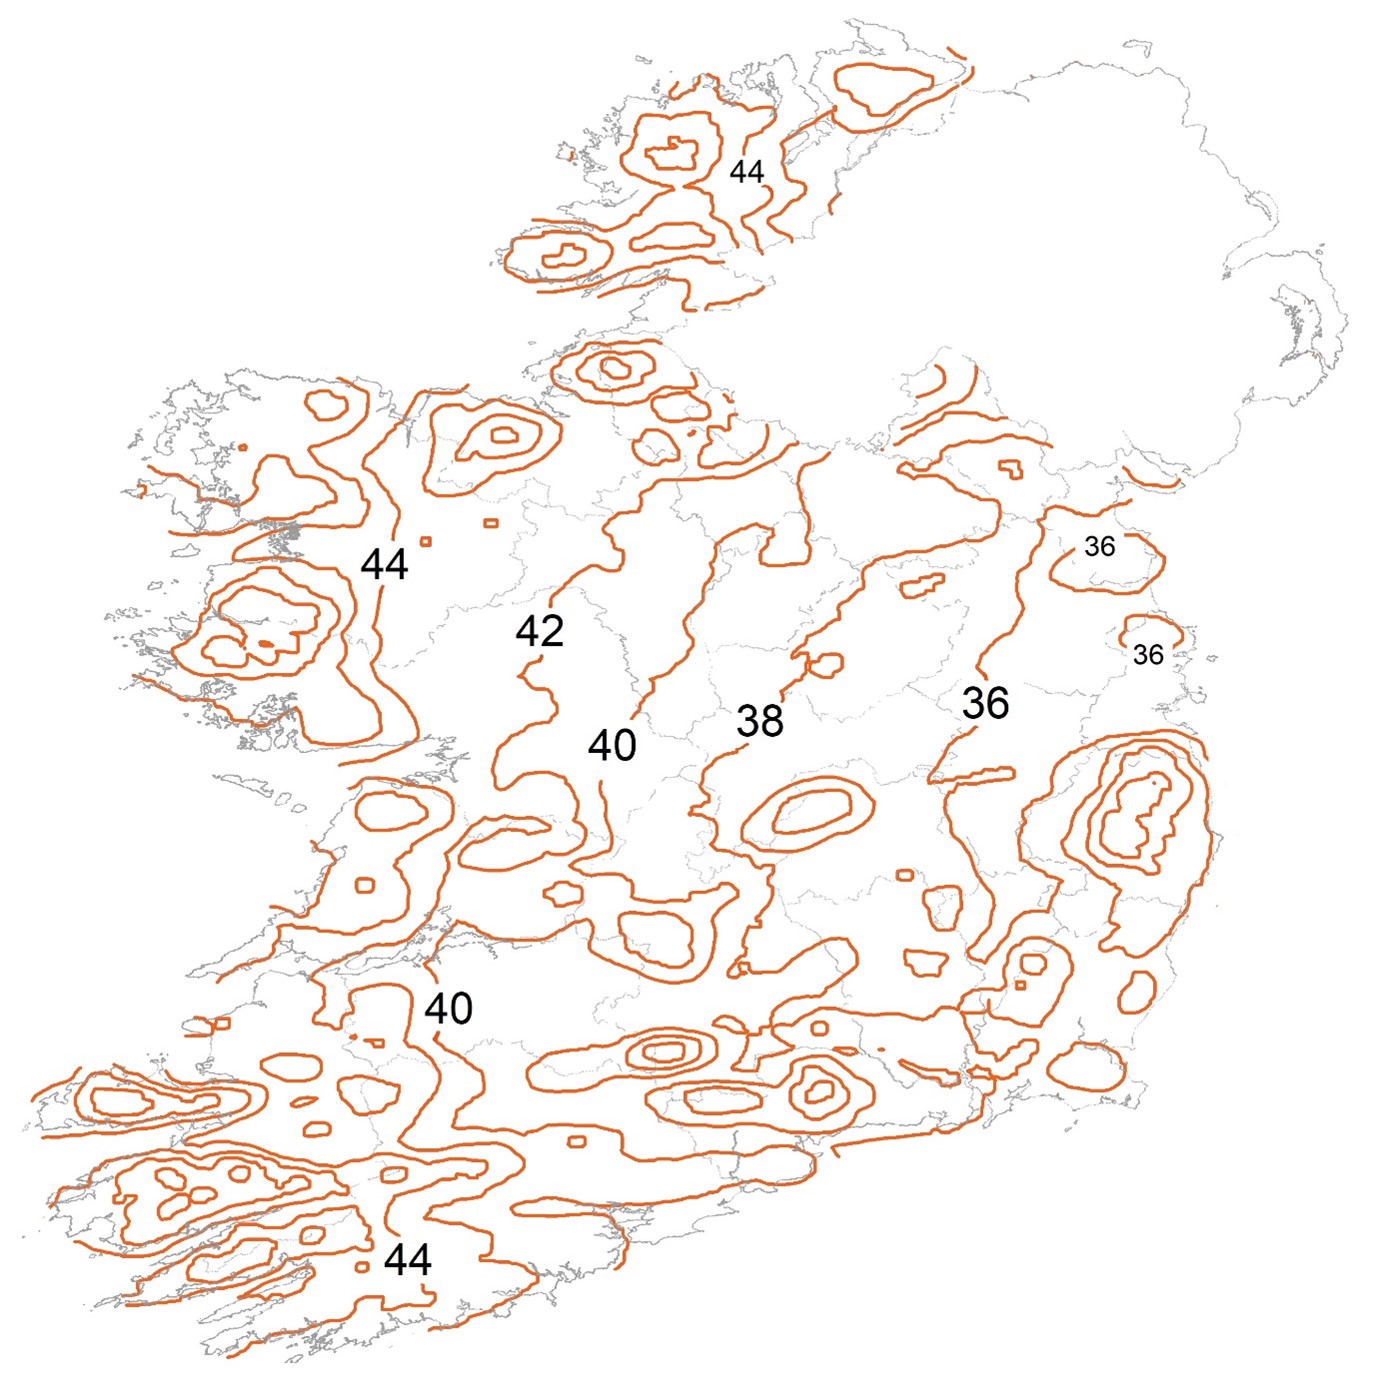 Spell map index (mS) of driving rain against vertical surfaces for the period 1991 – 2020 for Ireland (I.S. EN ISO 15927 32009).